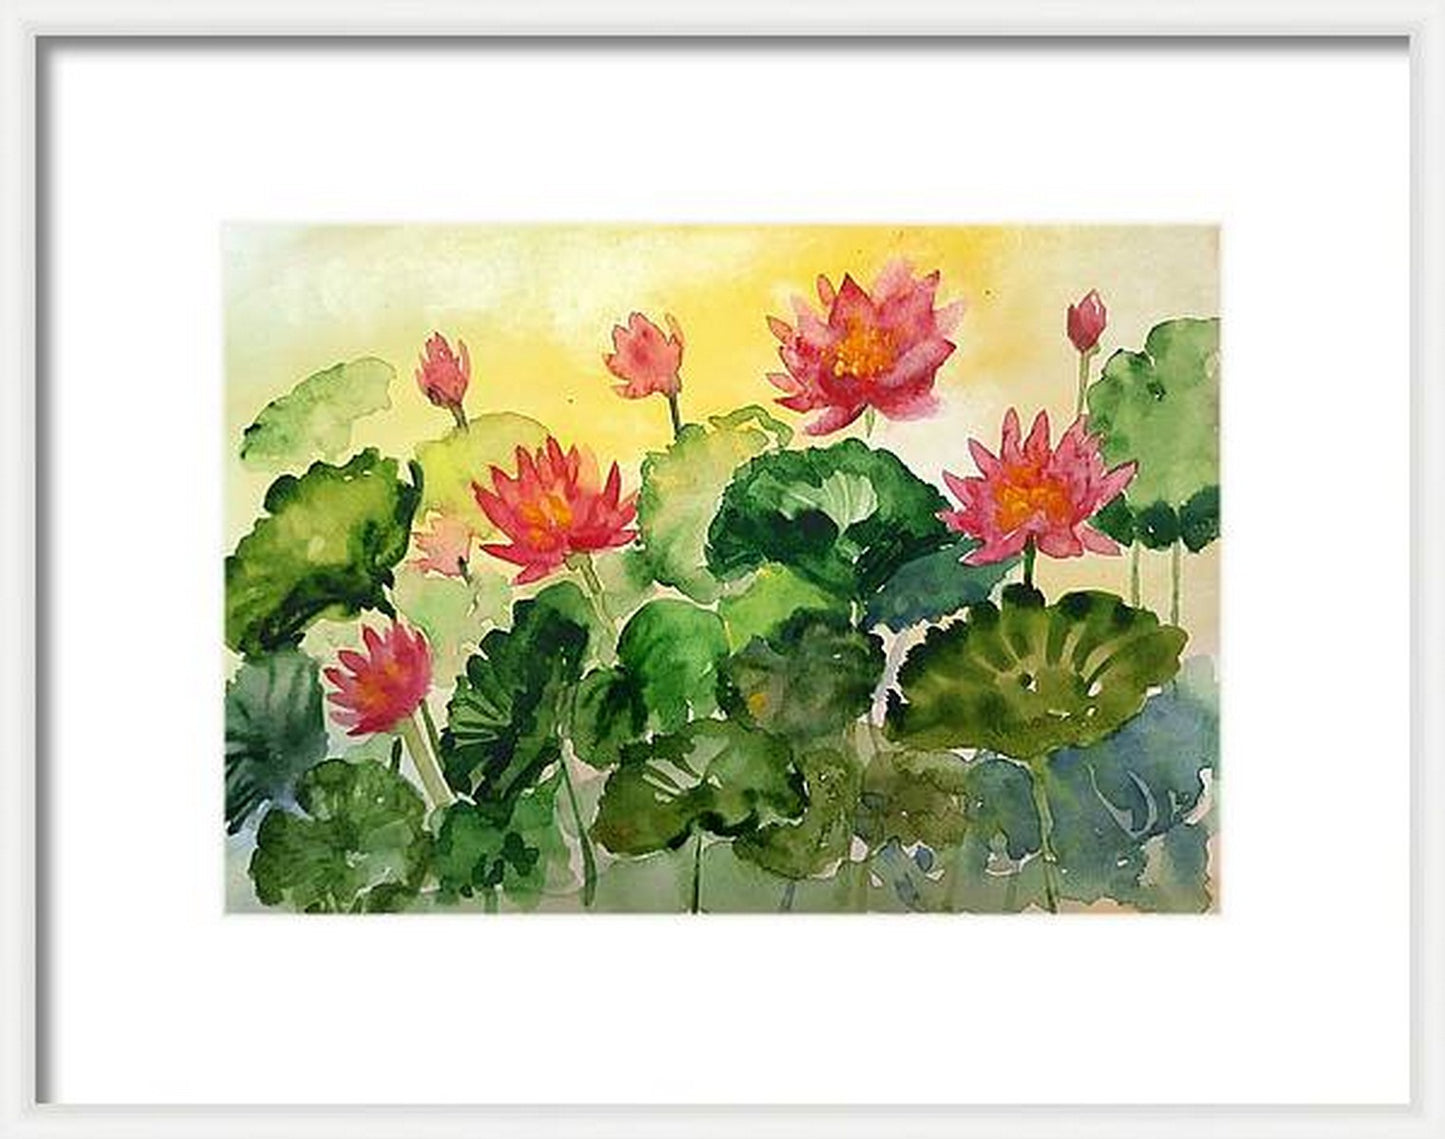 In a virtual frame, Sunset Water Lilies, watercolor painting on paper